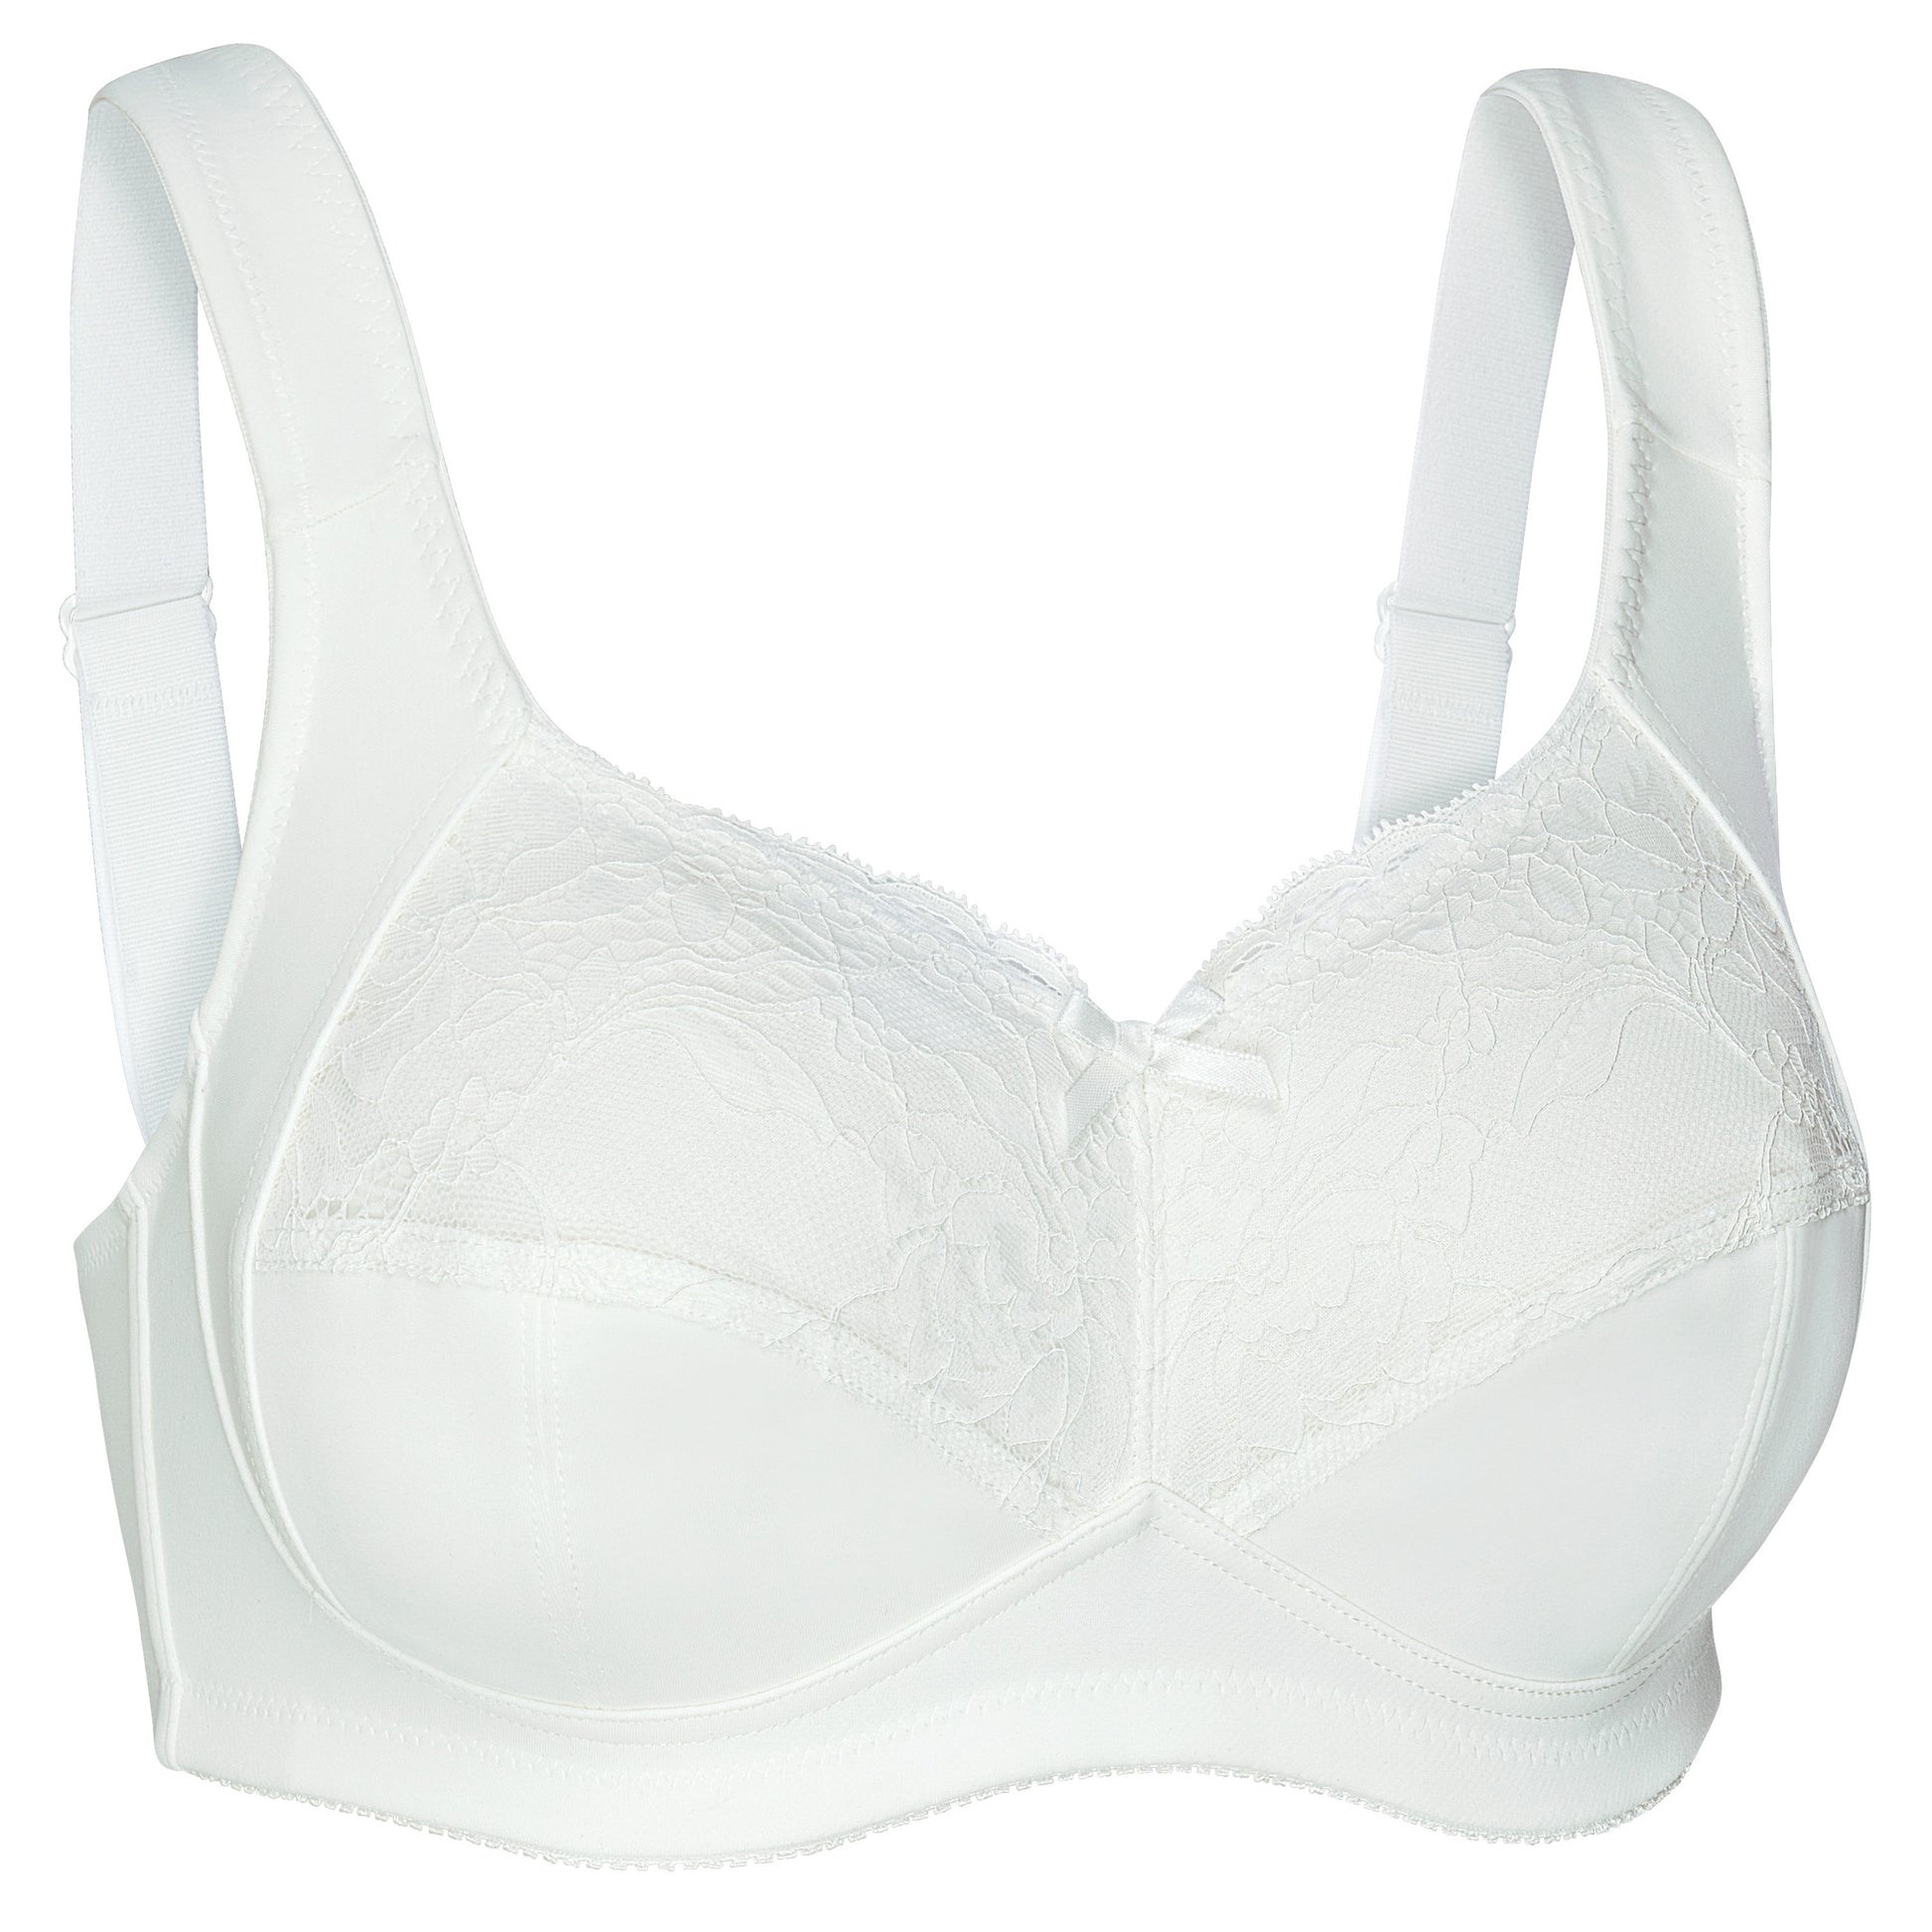 Mastectomy Bras Shop Near Me, White Constructed With A Thin Layer